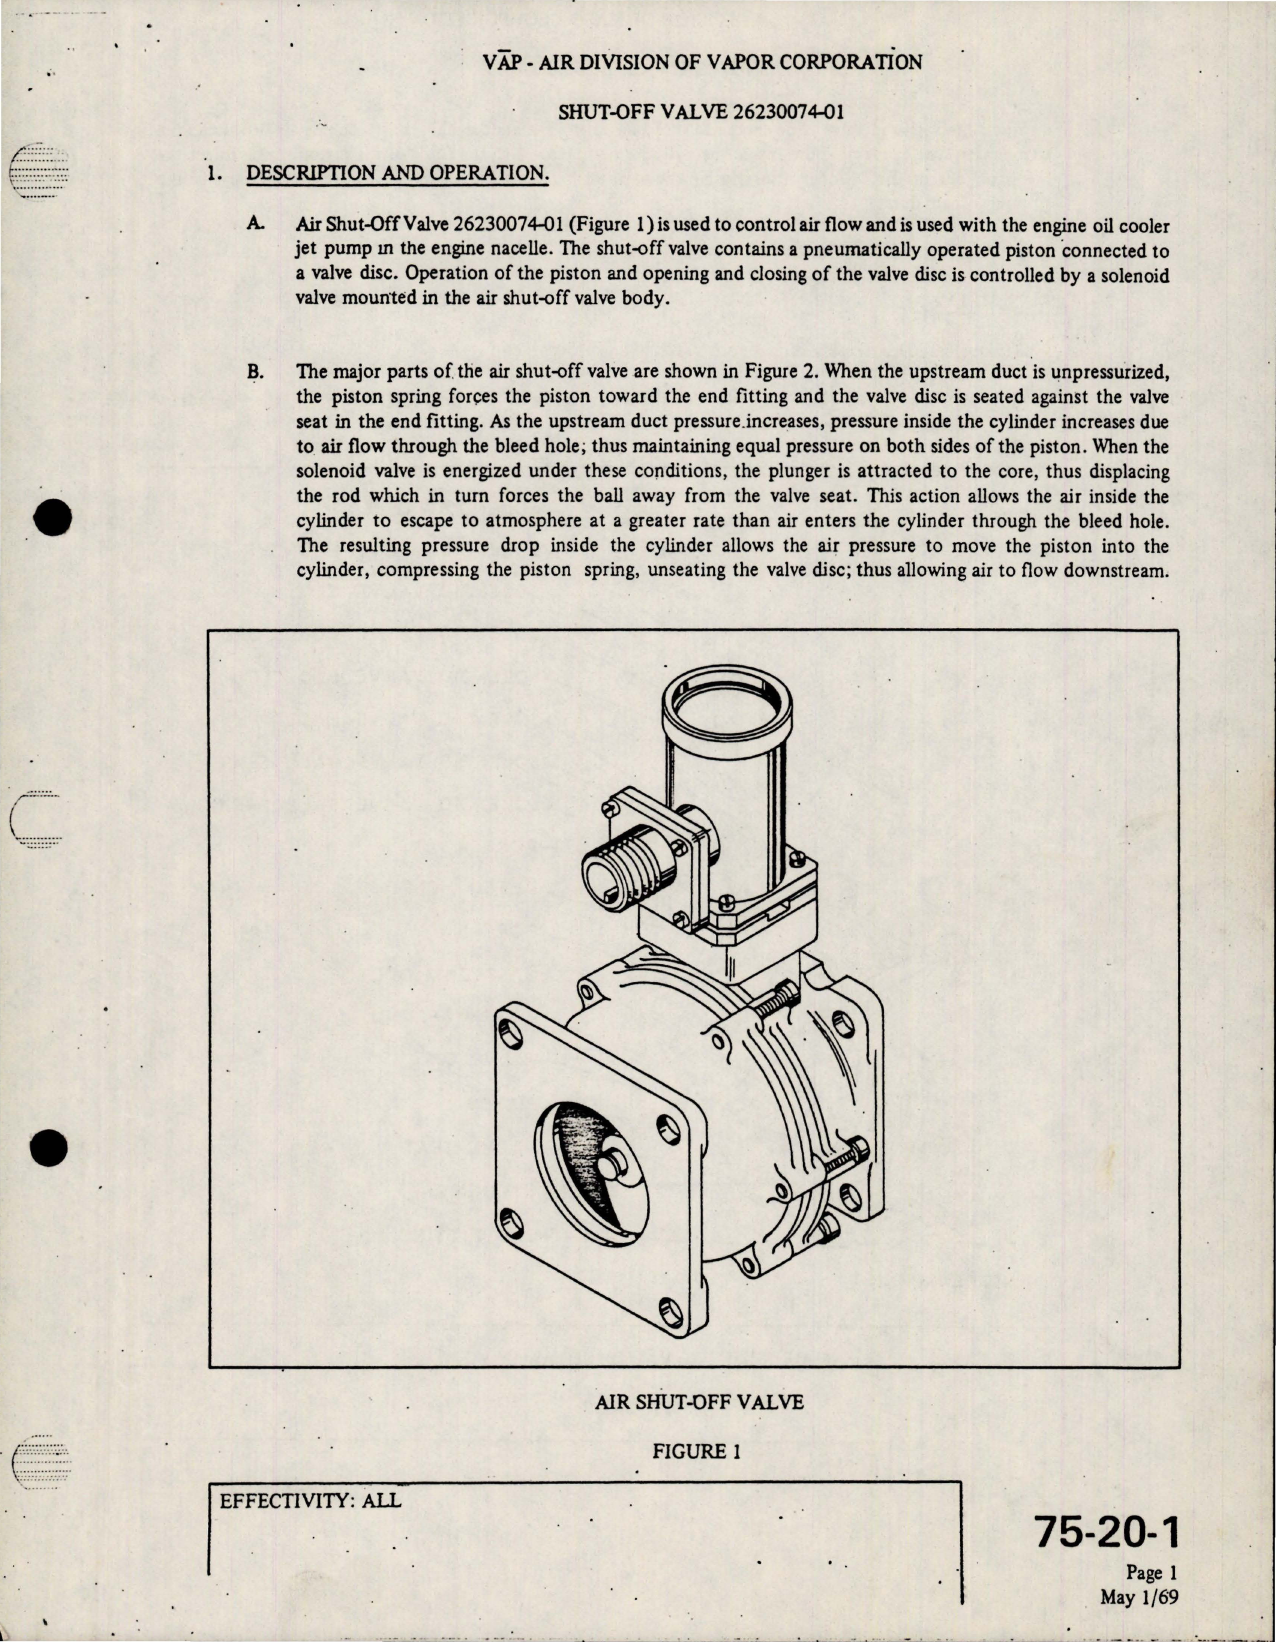 Sample page 5 from AirCorps Library document: Overhaul Instructions with Parts Breakdown for Shut Off Valve - Part 26230074-01